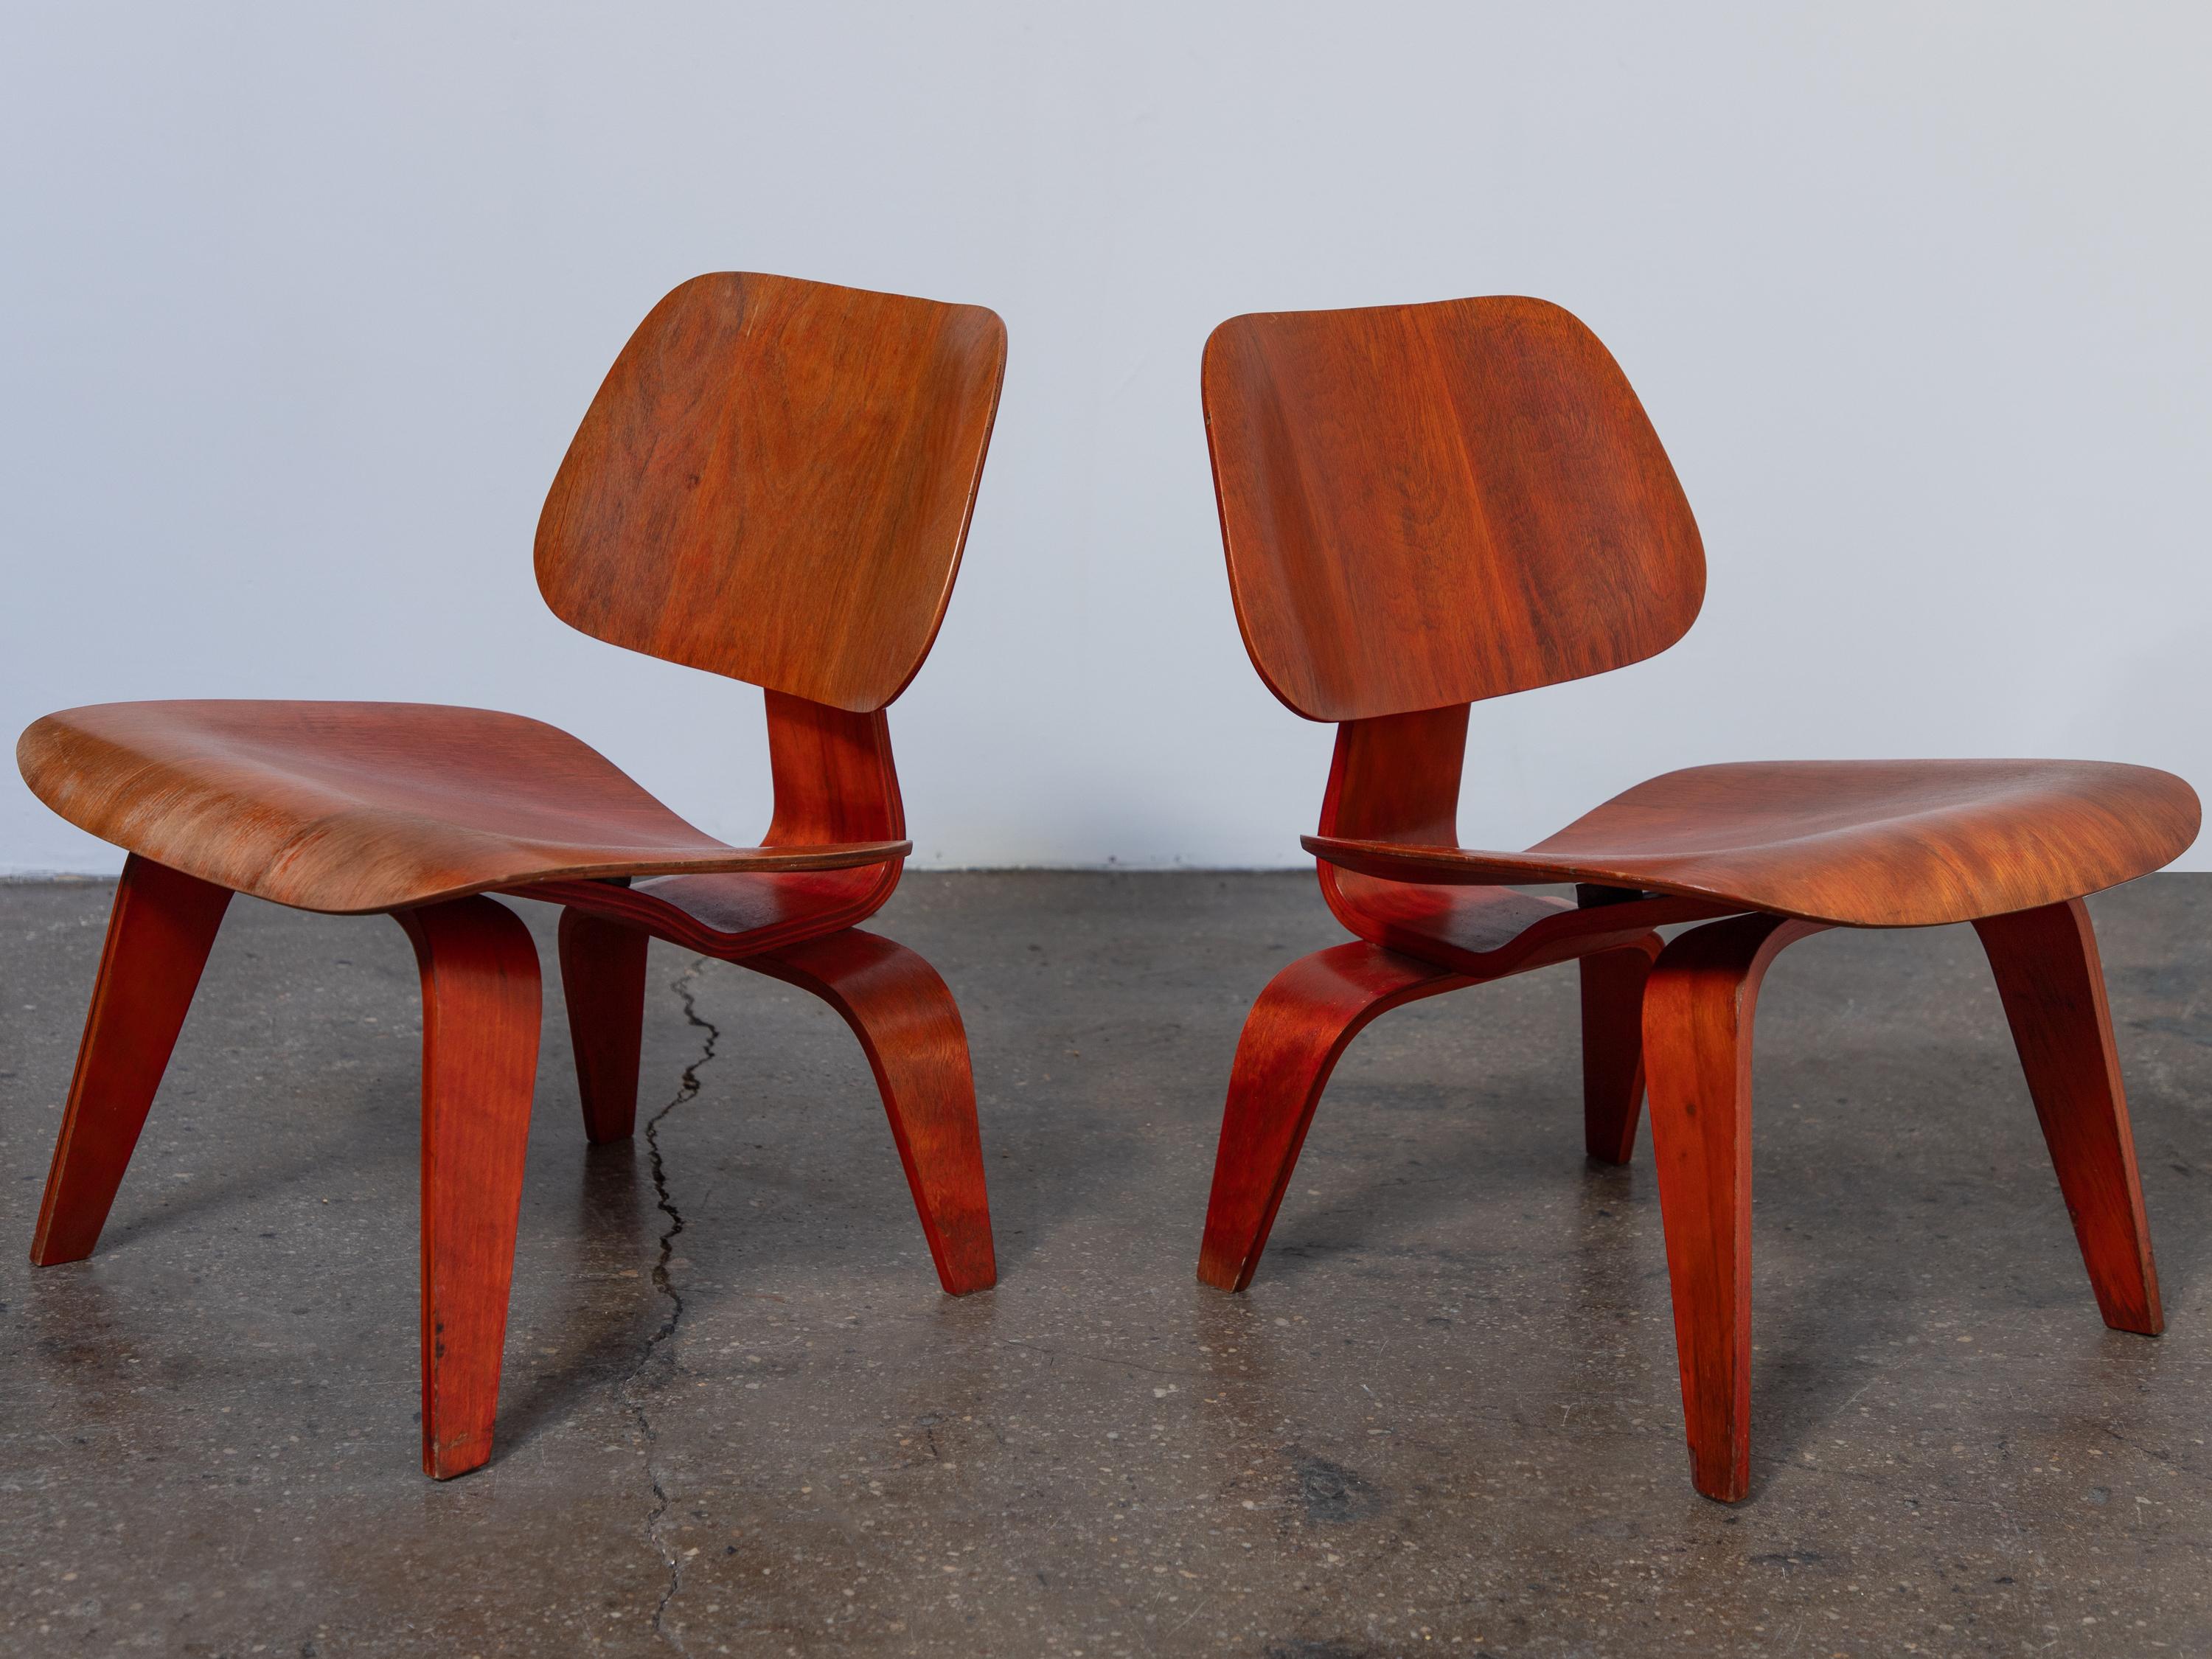 Spectacular matched set of red aniline dye LCW lounge chairs, designed by Charles and Ray Eames and manufactured by Evans Product Company (before Herman Miller production).  Aniline-dyed wood is vibrant and rich, showcasing the dramatic grain